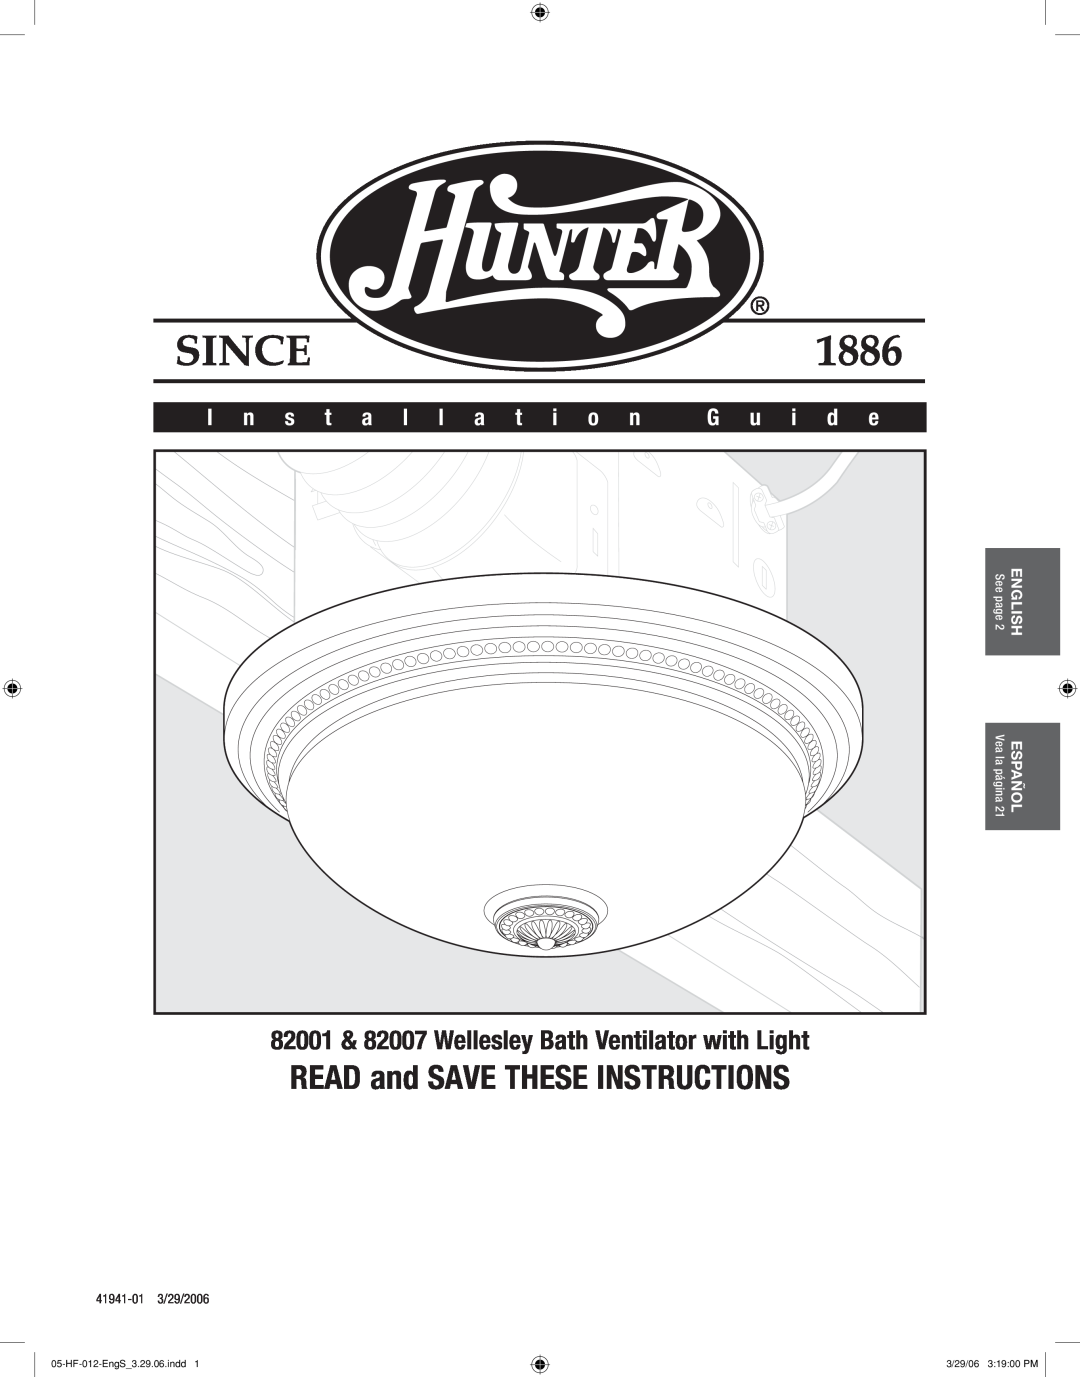 Hunter Fan manual READ and SAVE THESE INSTRUCTIONS, 82001 & 82007 Wellesley Bath Ventilator with Light, G u i d e 